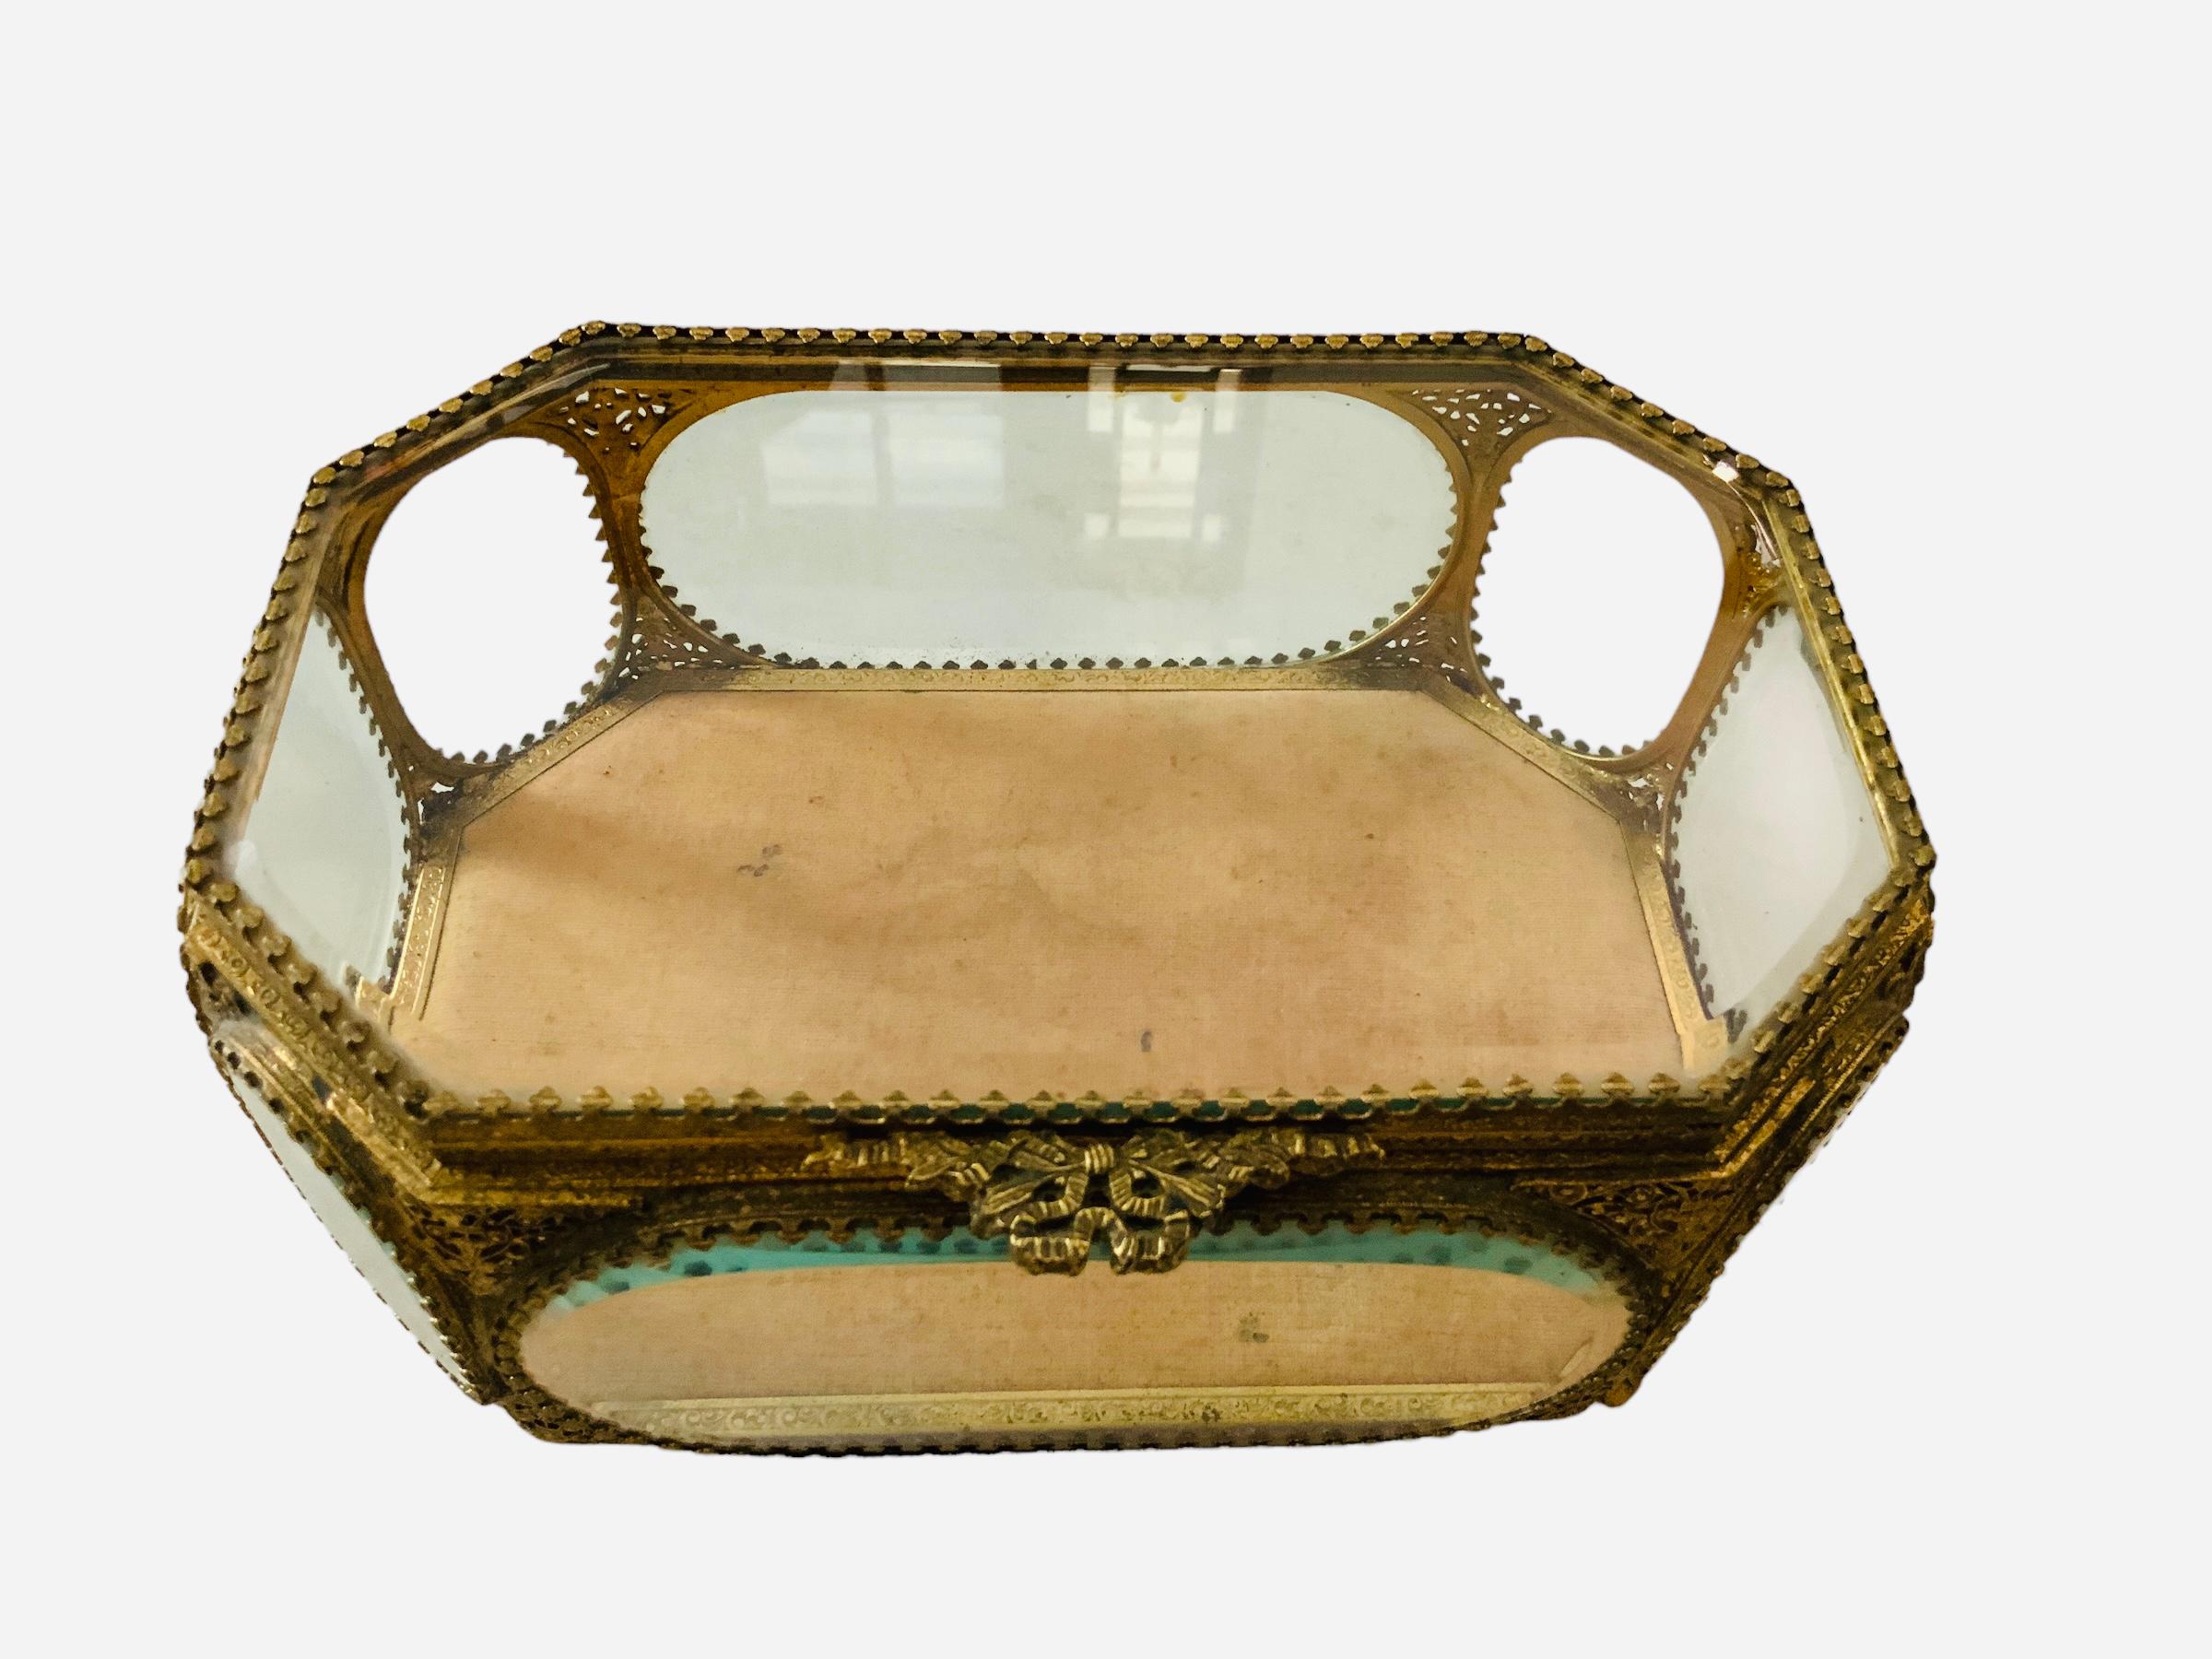 Victorian Style Gilt Metal Octagonal Shaped Casket/Jewelry Box In Good Condition For Sale In Guaynabo, PR